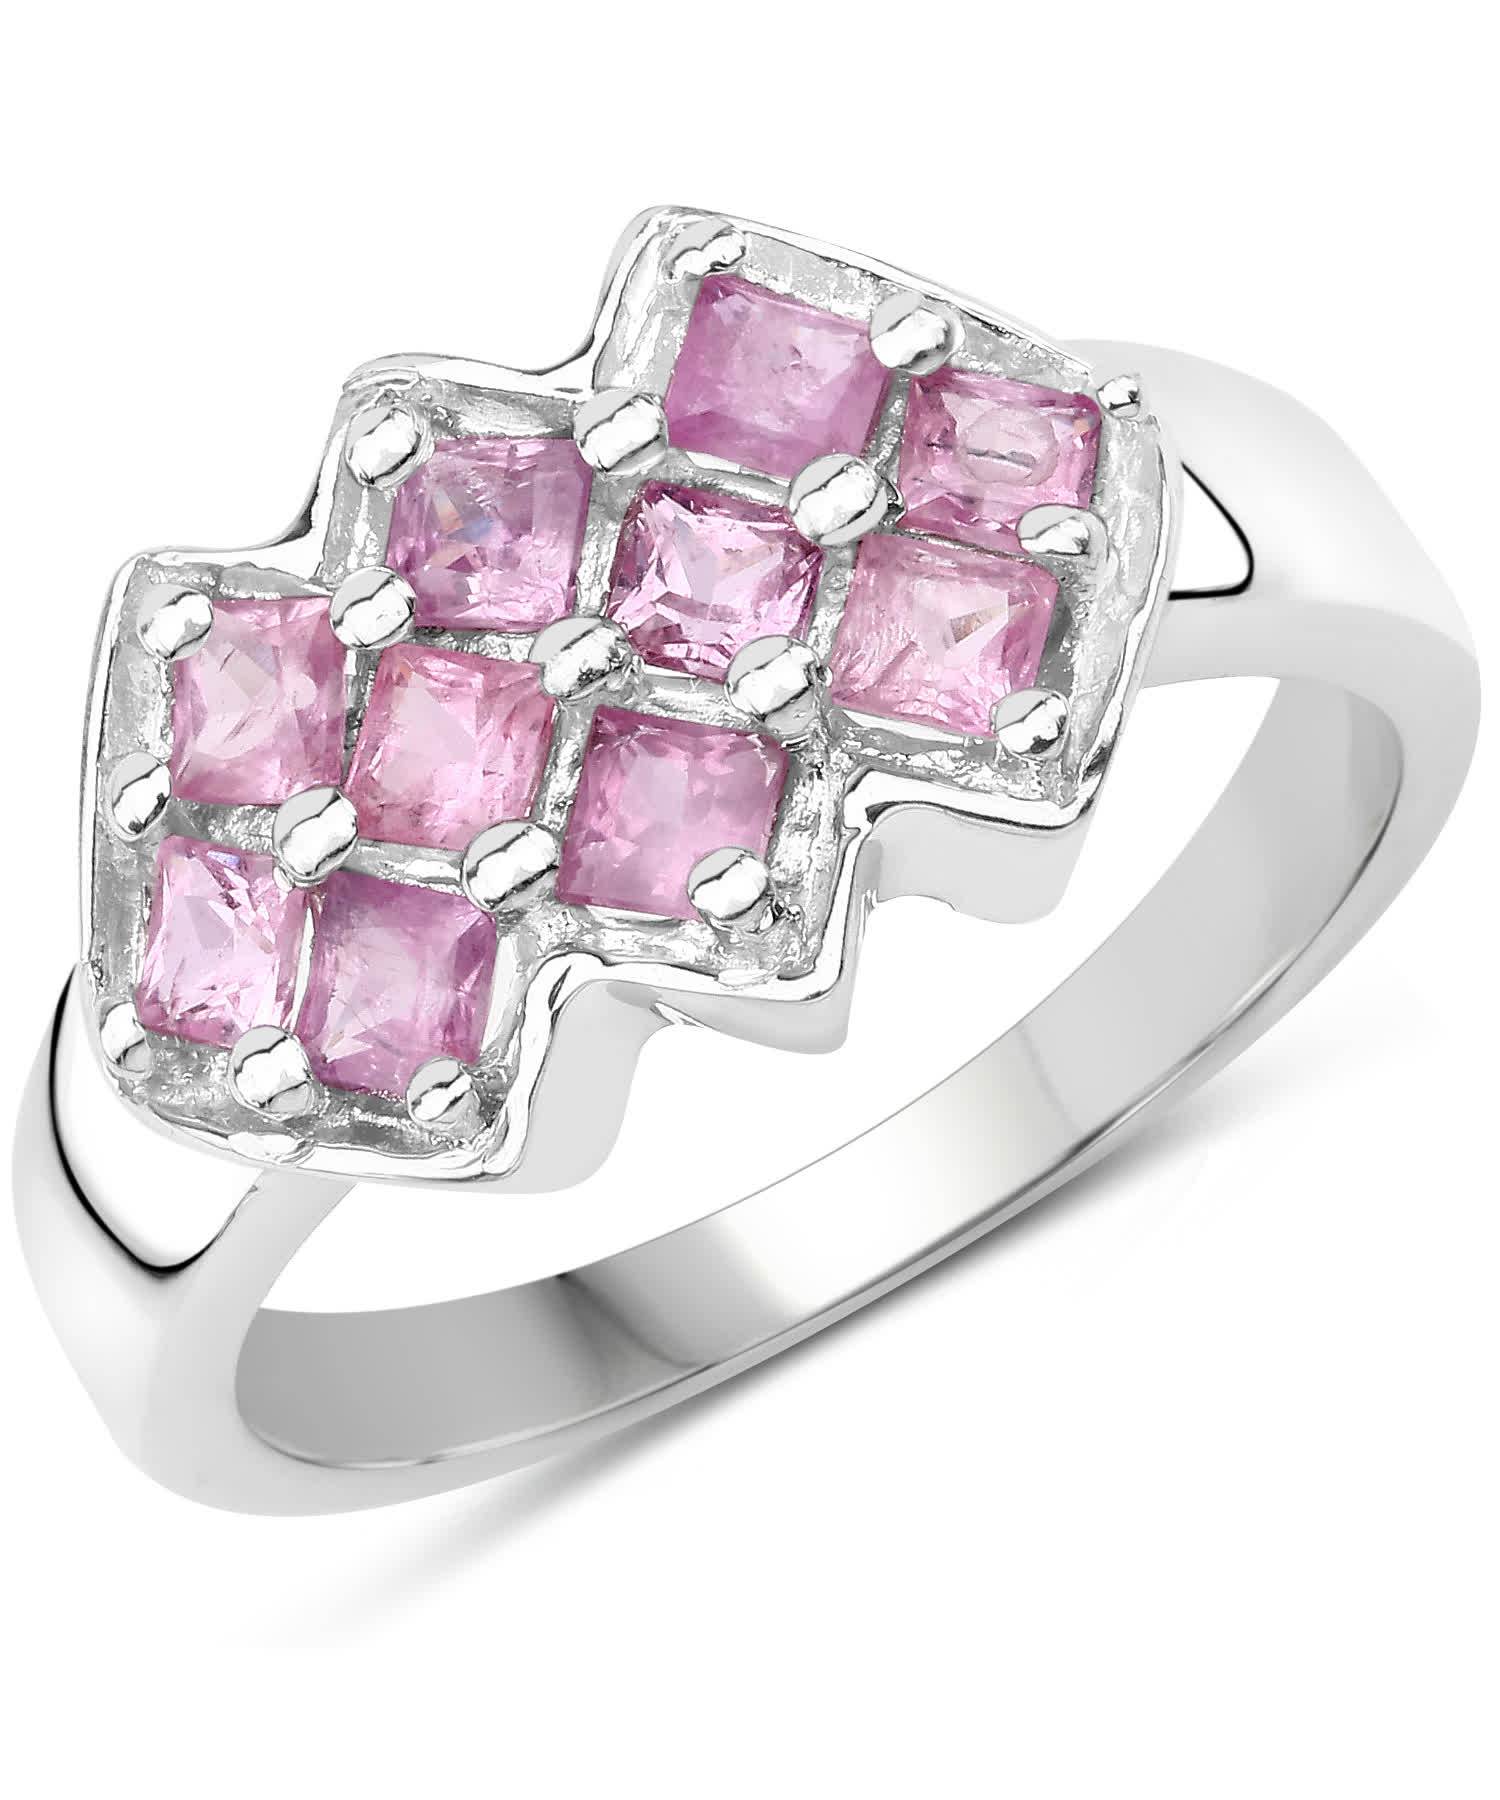 1.20ctw Natural Pink Sapphire Rhodium Plated 925 Sterling Silver Ring View 1